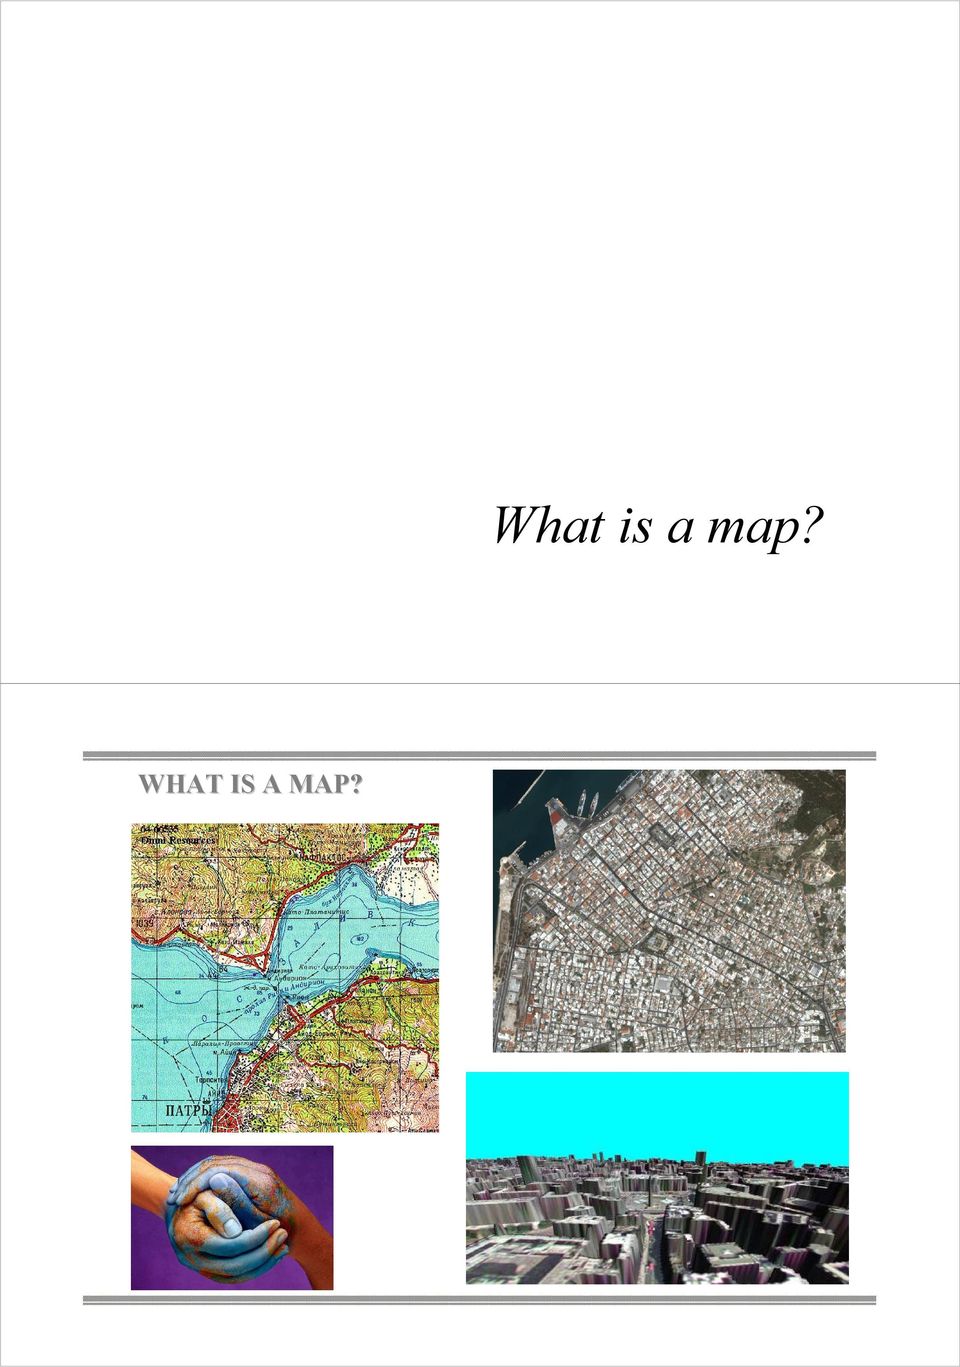 IS A MAP?